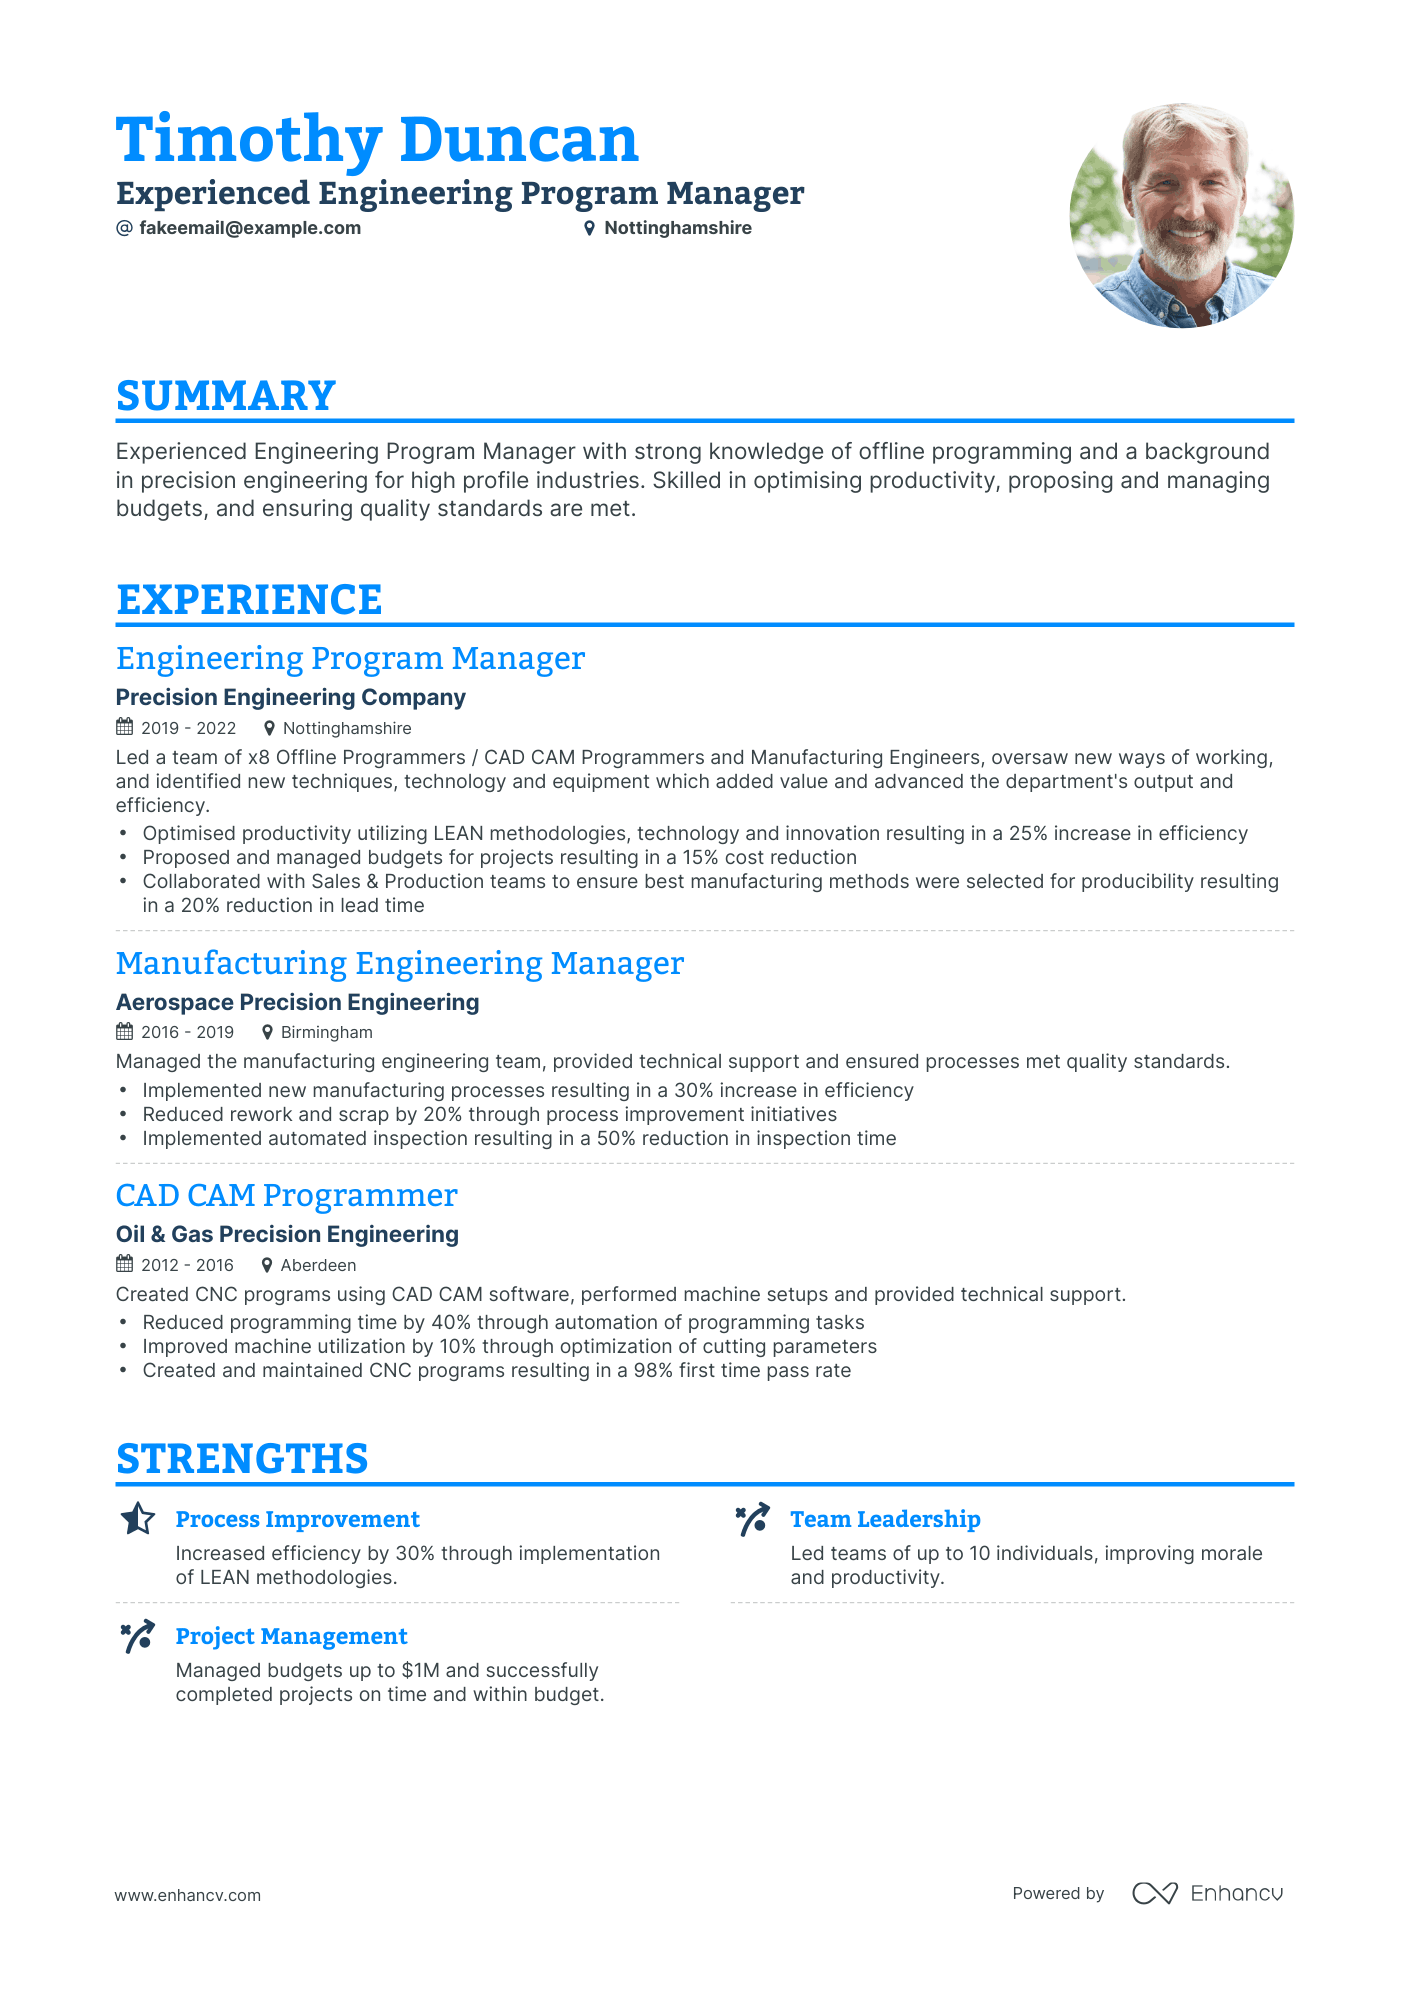 Classic Engineering Program Manager Resume Template